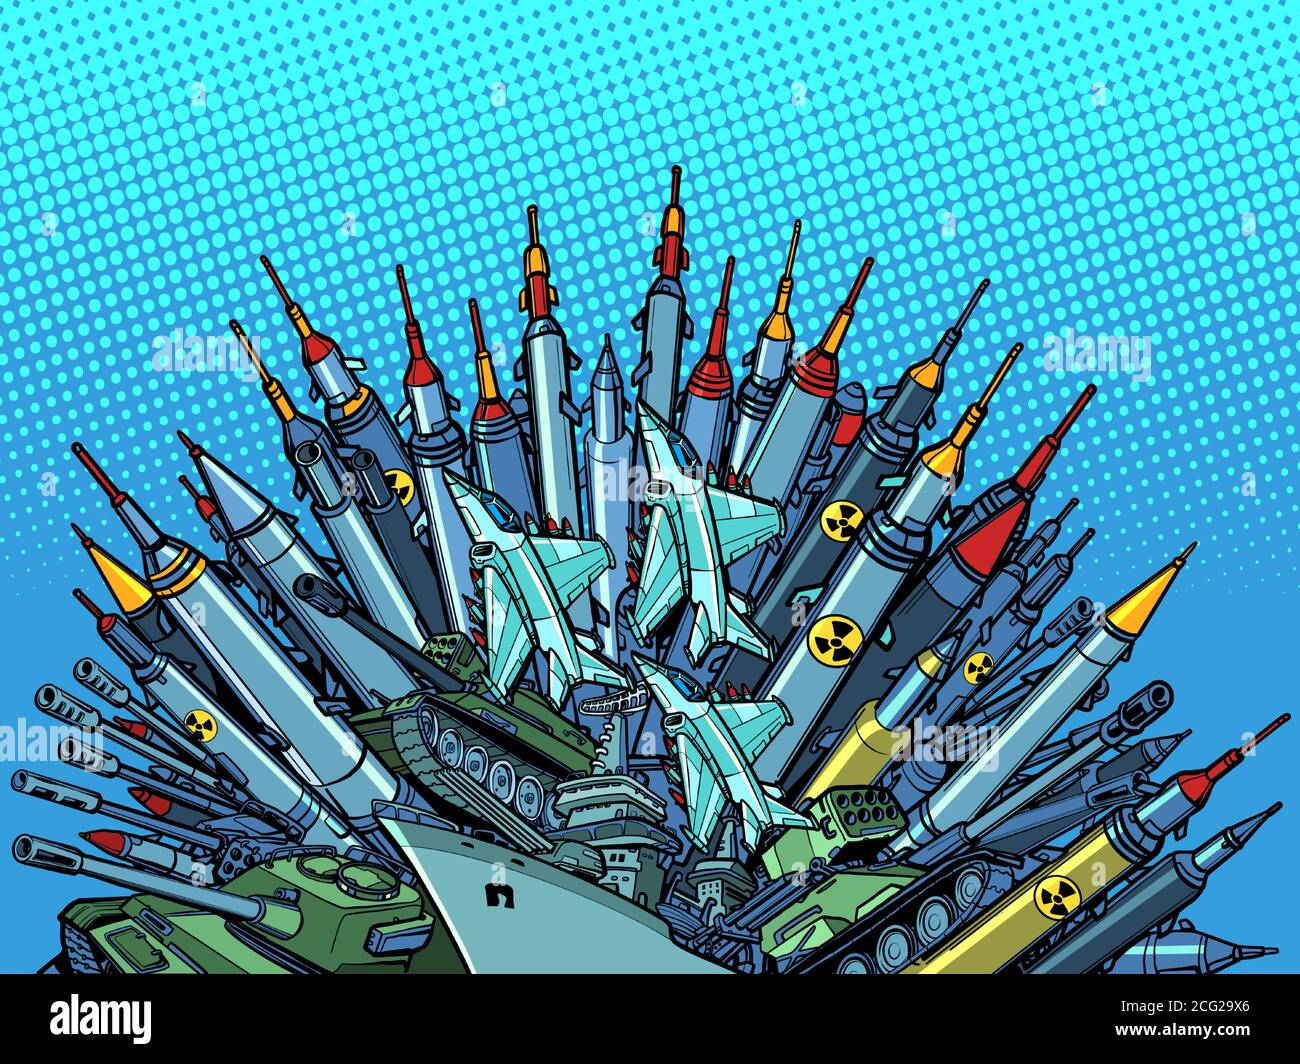 missiles weapons, arms race, militarism Stock Vector